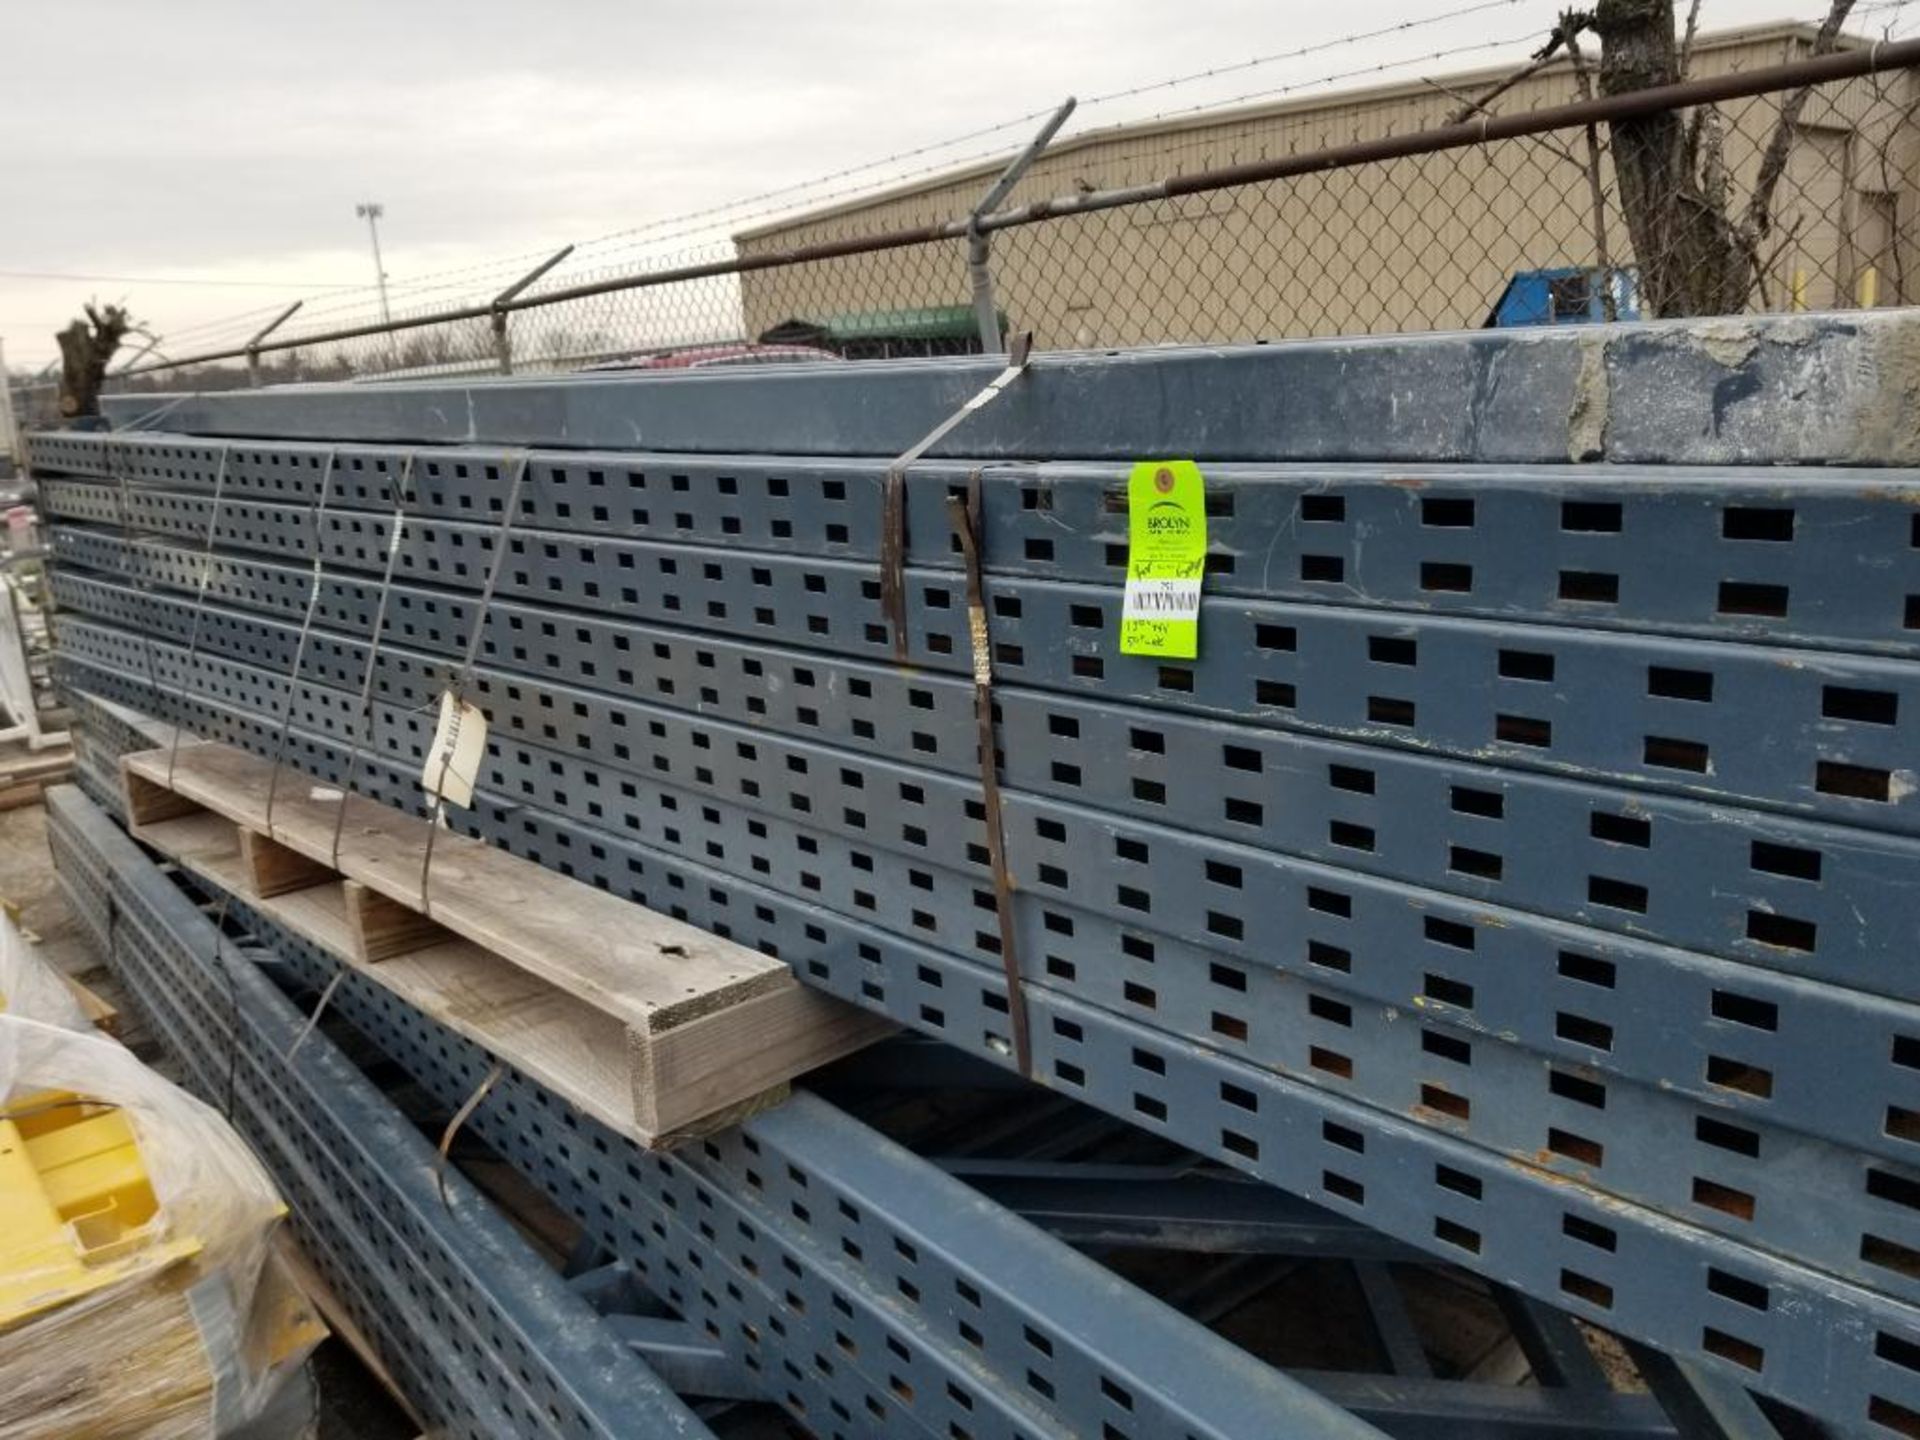 Qty 6 Pallet racking uprights and 9 posts. 150in tall x 50in wide.